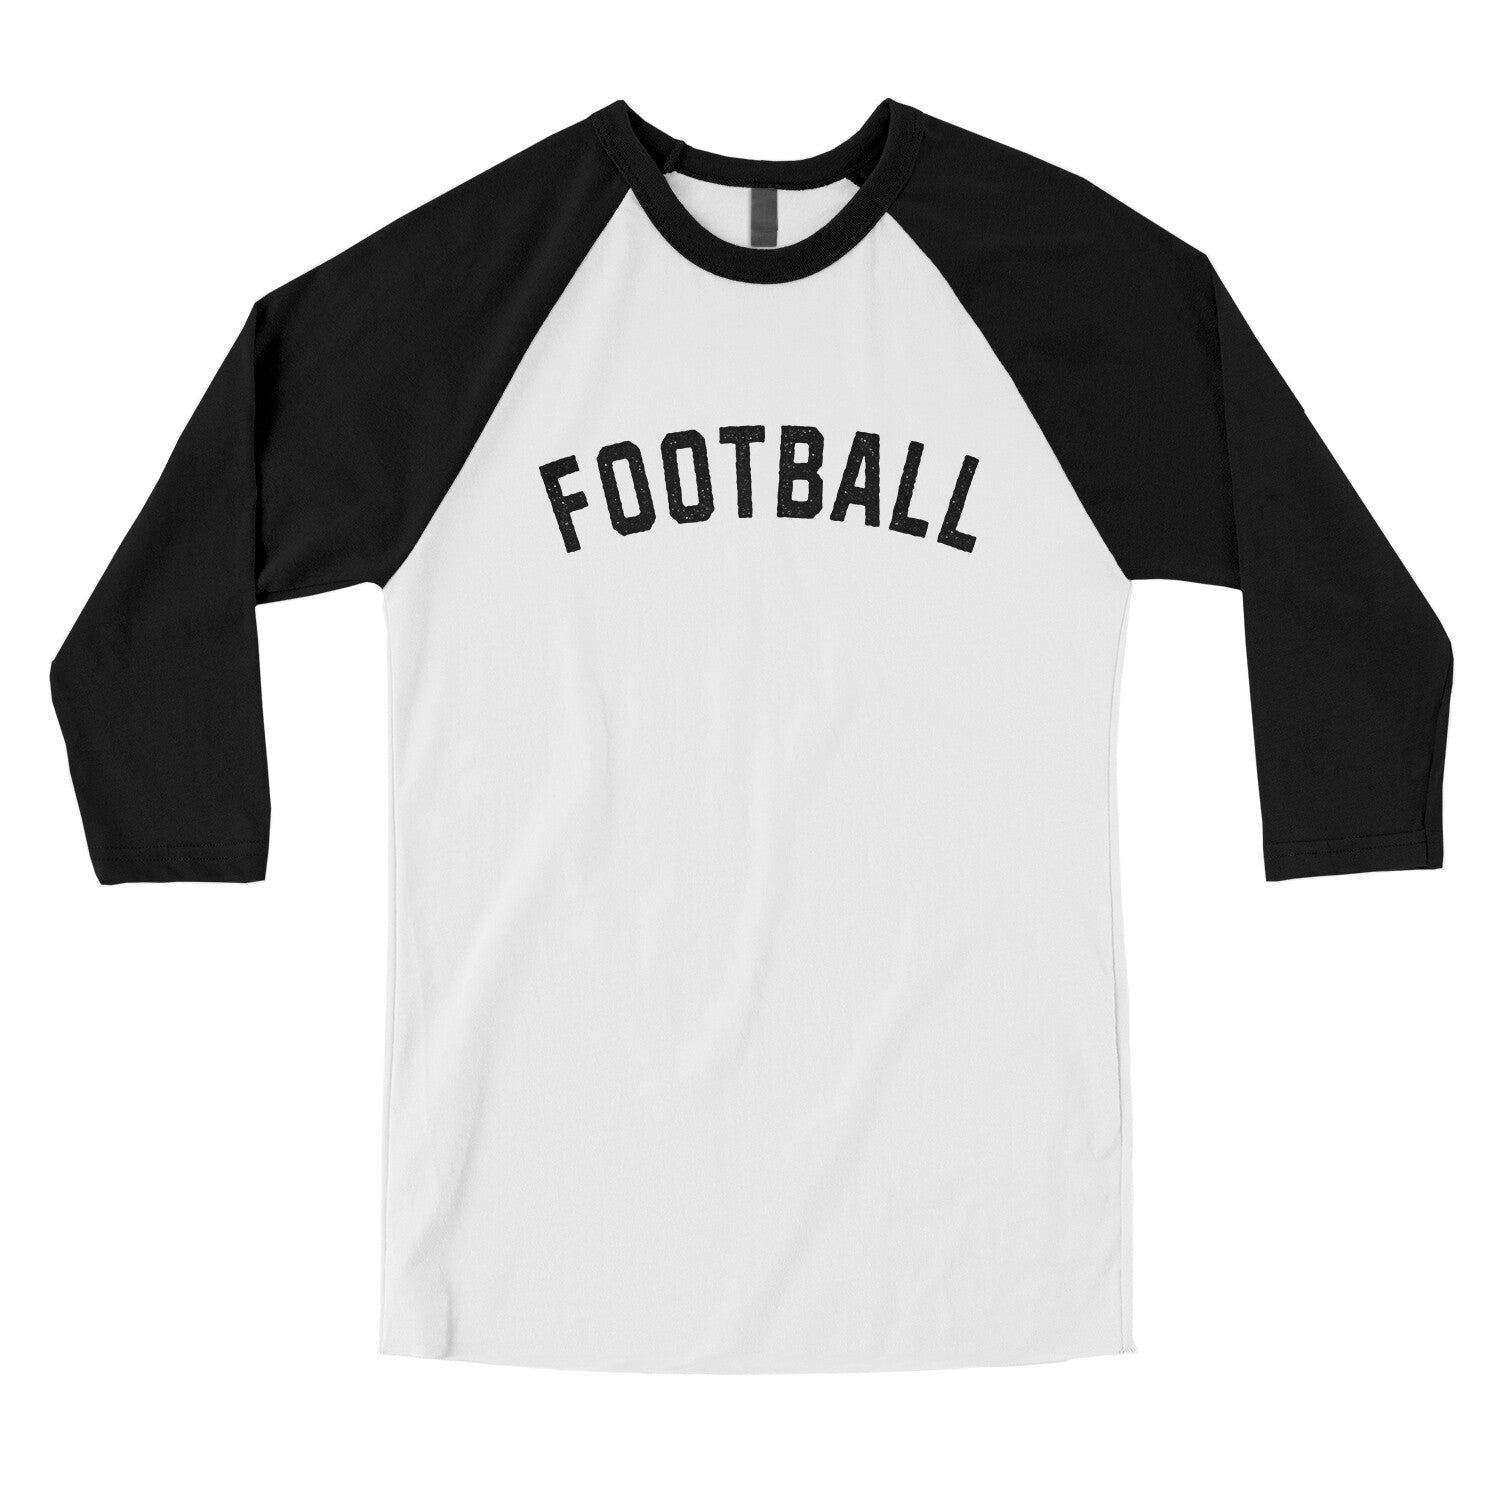 Football in White with Black Color